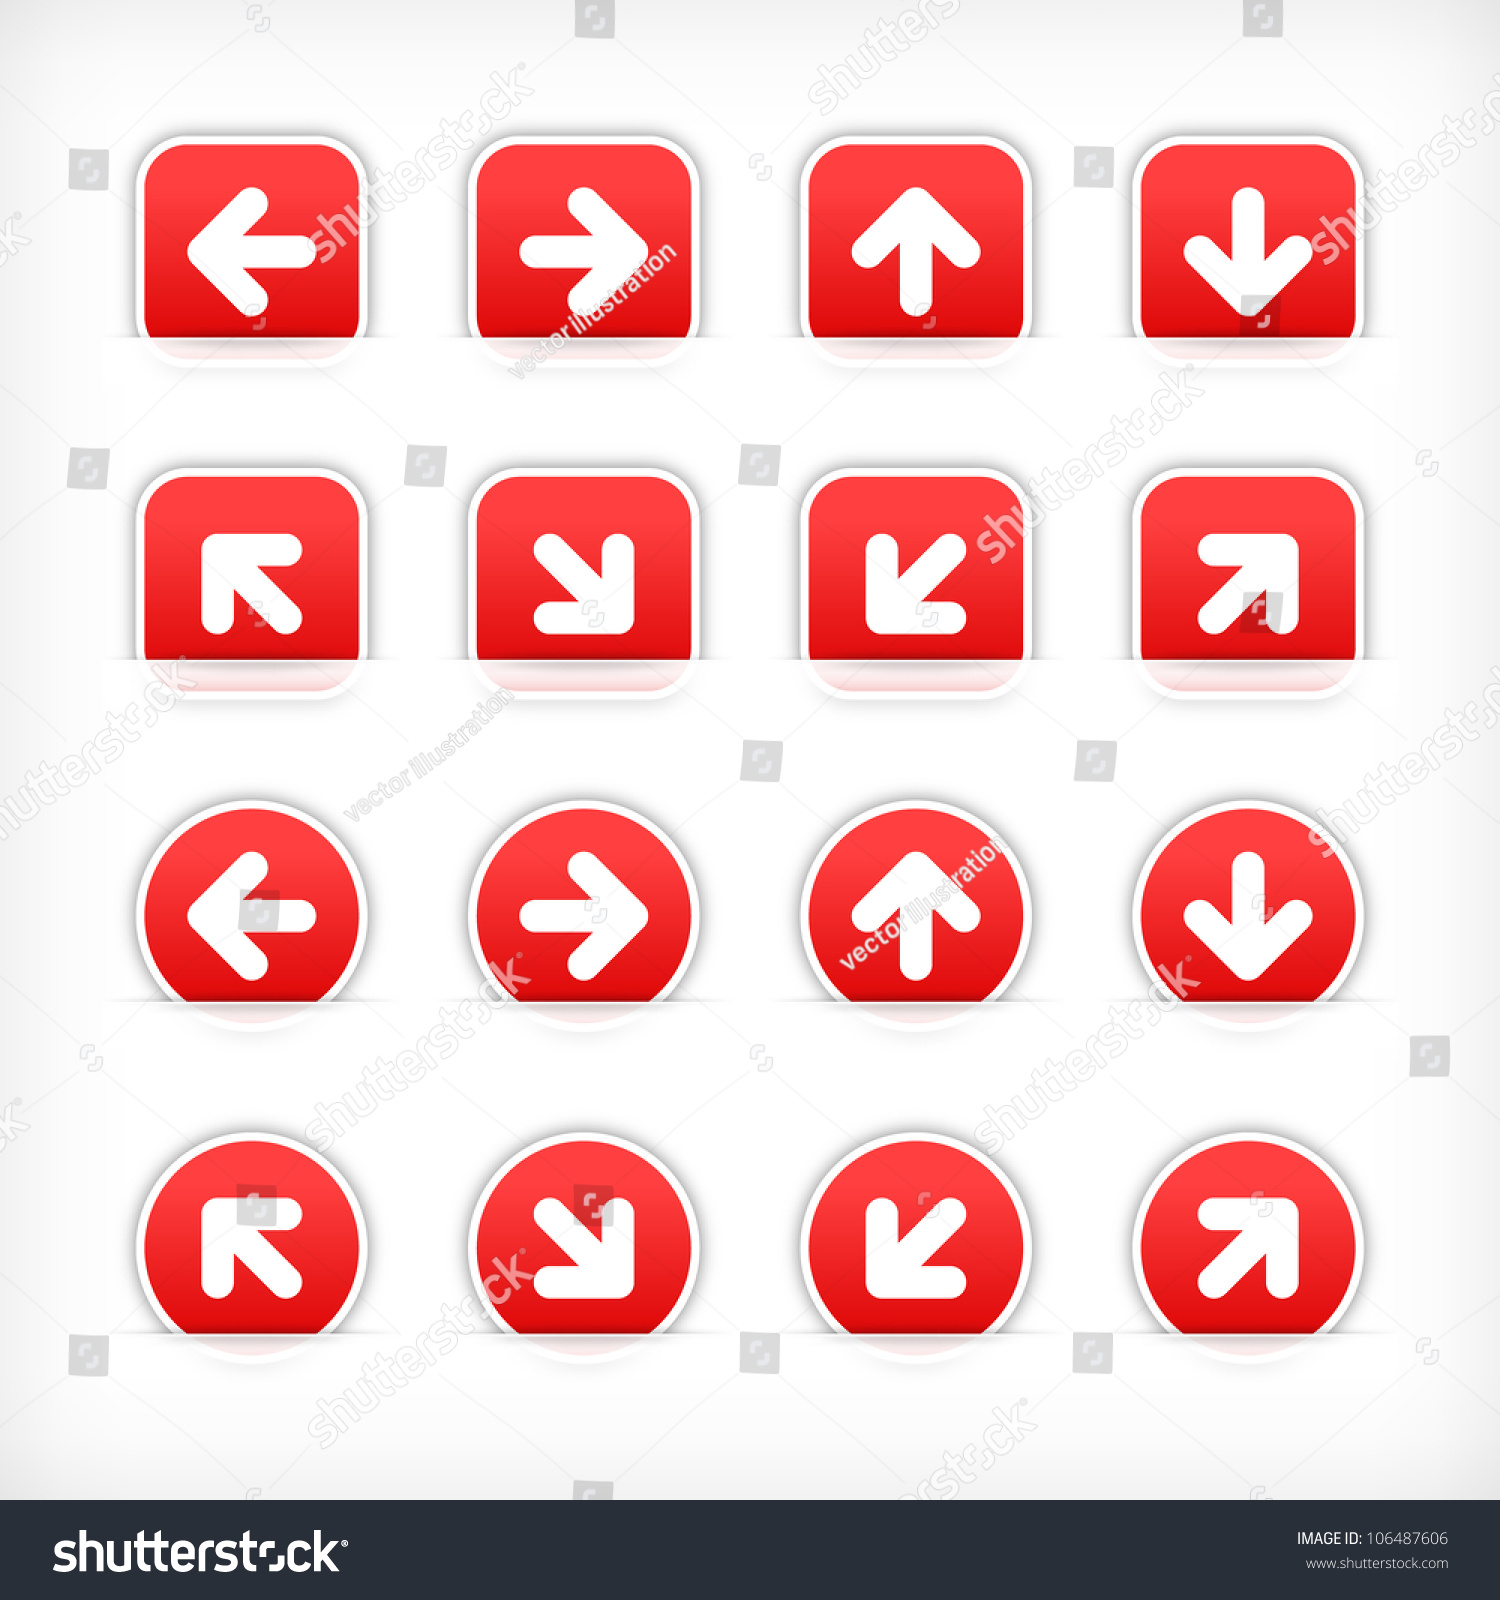 Red Arrow Sign Sticker On Cut Stock Vector Royalty Free 106487606 Shutterstock 6304